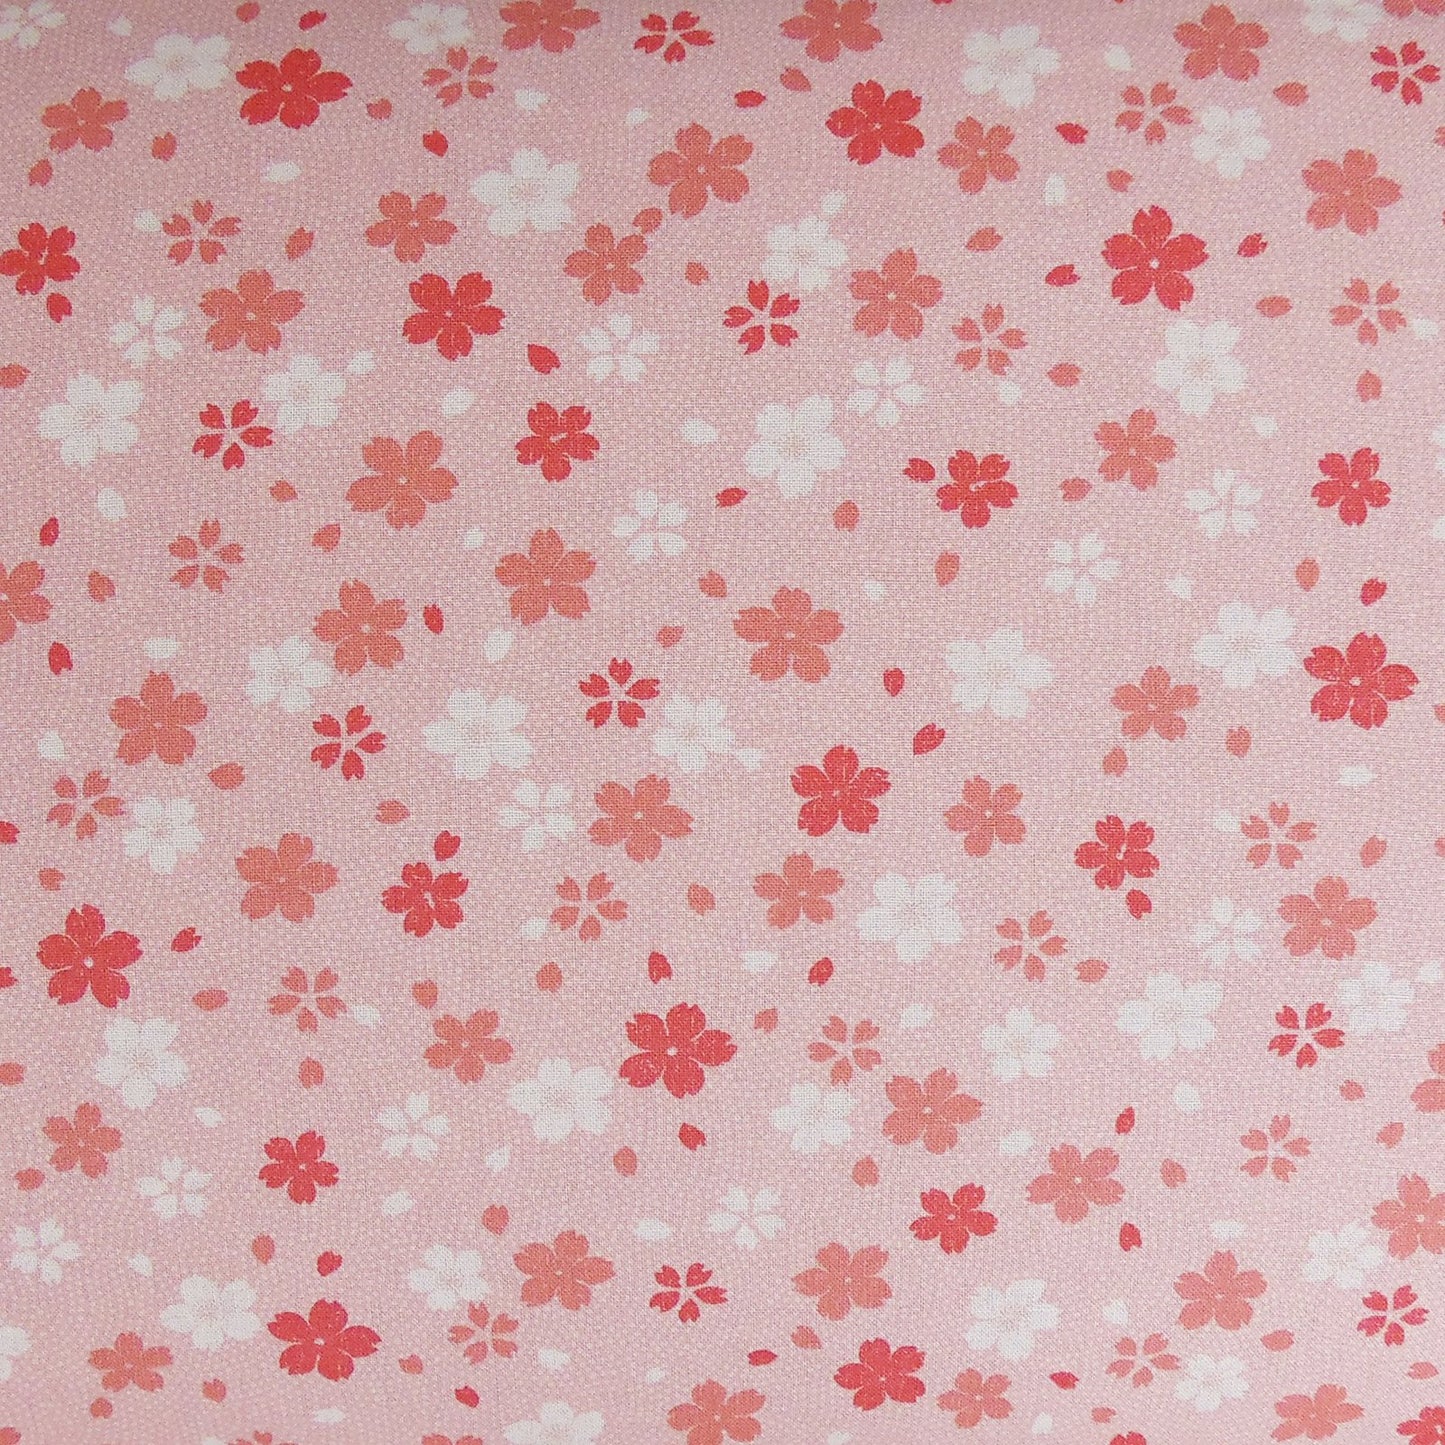 Imported Japanese Fabric - Cherry Blossom Pink_Fabric_Imported from Japan_100% Cotton_Japanese Sleep System